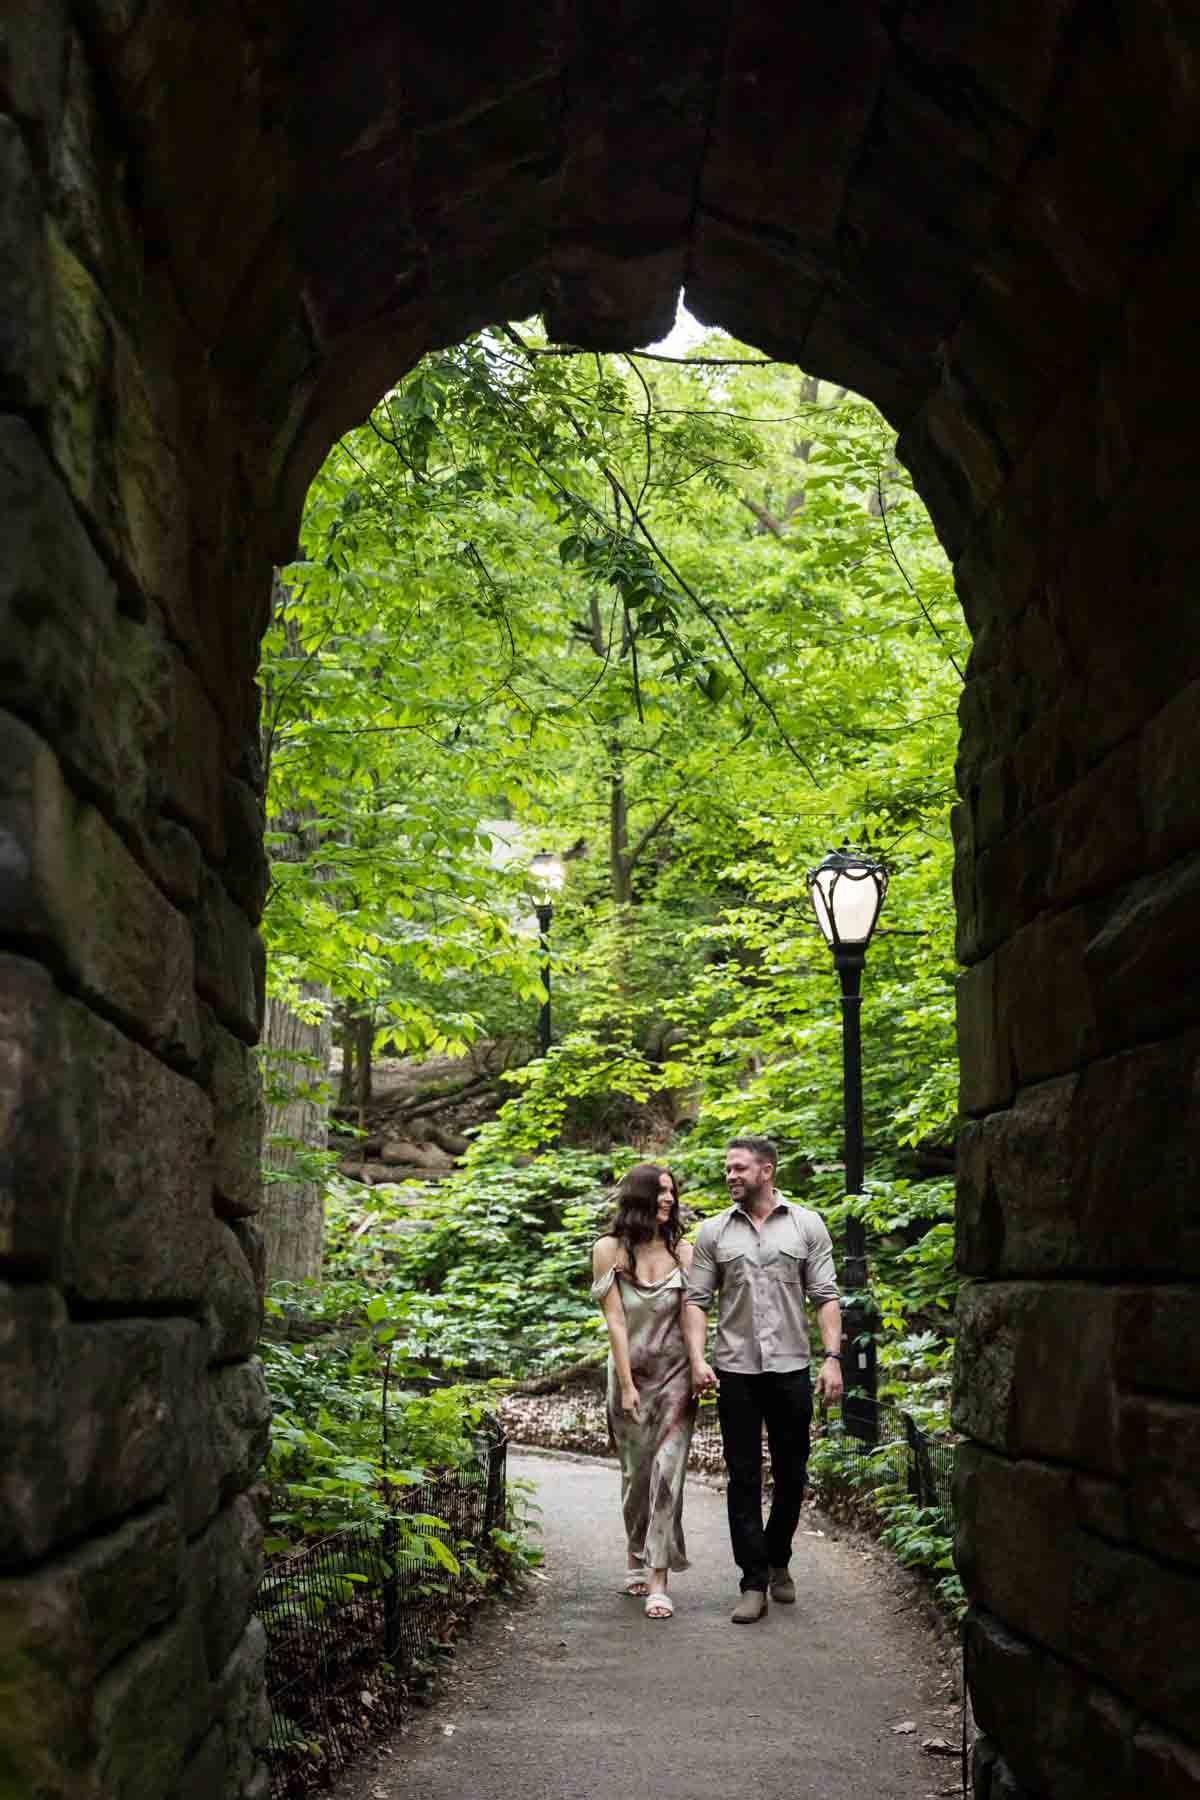 View through stone arch of couple walking in park during a Central Park surprise proposal